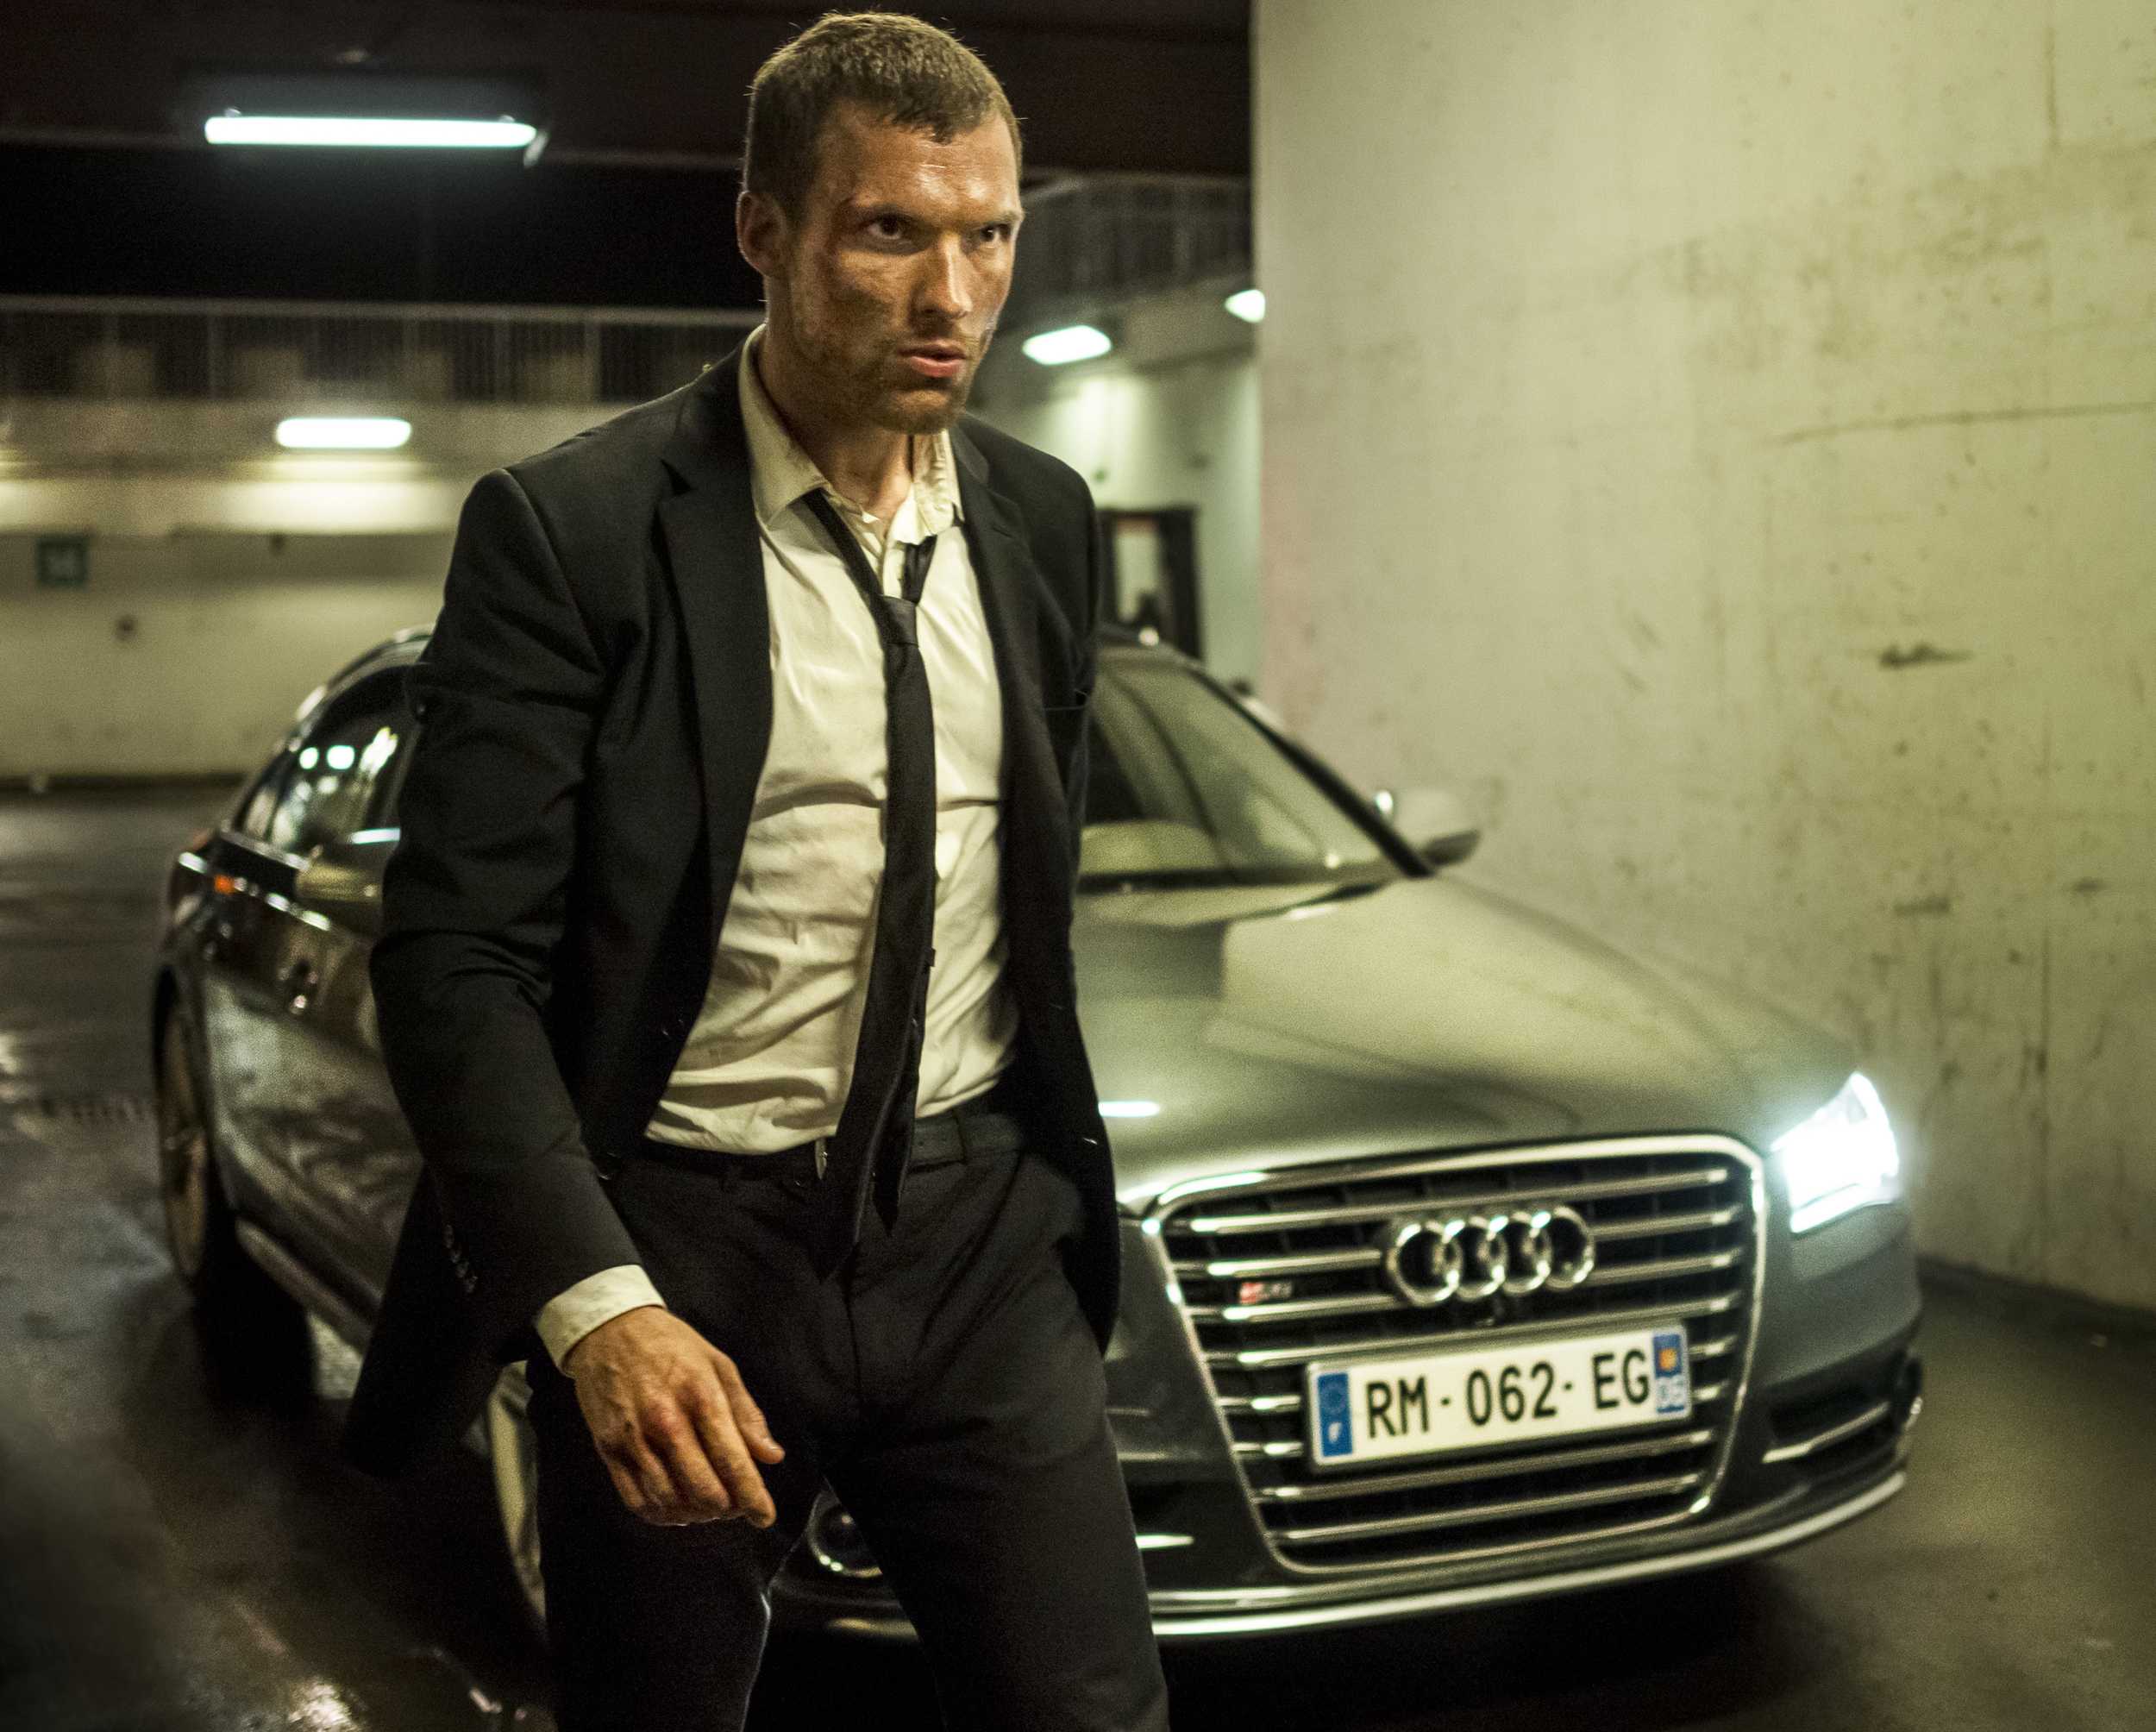 facebook.com“Transporter Refueled” released on Friday, earning $7.1 million in the box office.